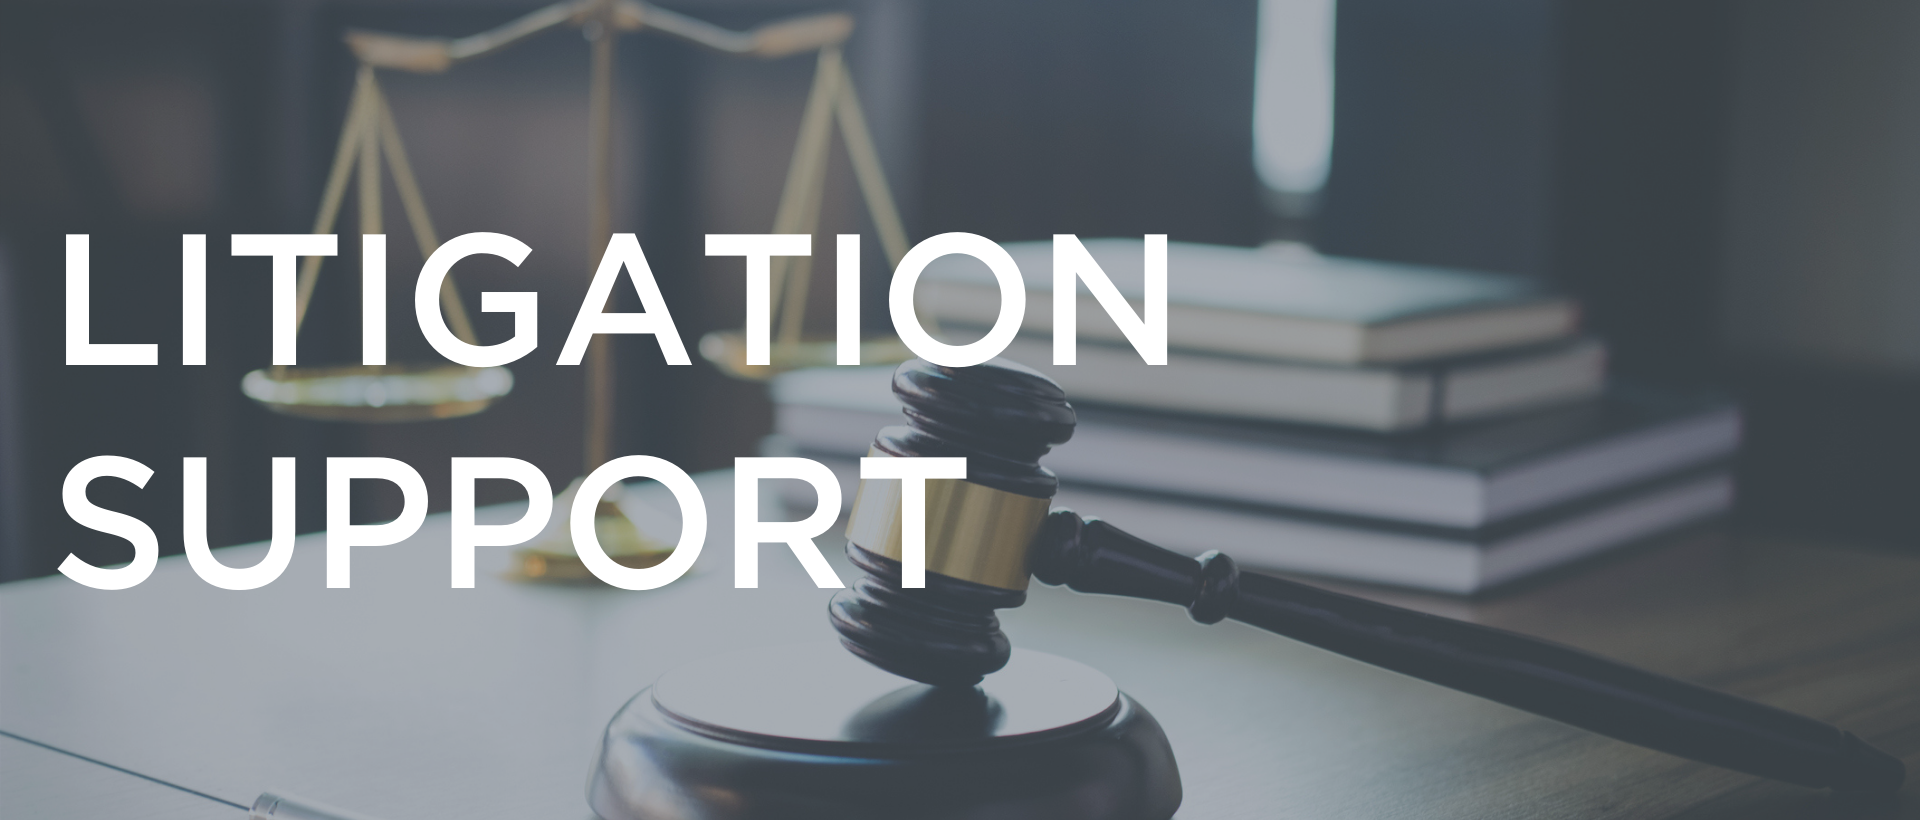 automated litigation support software programs